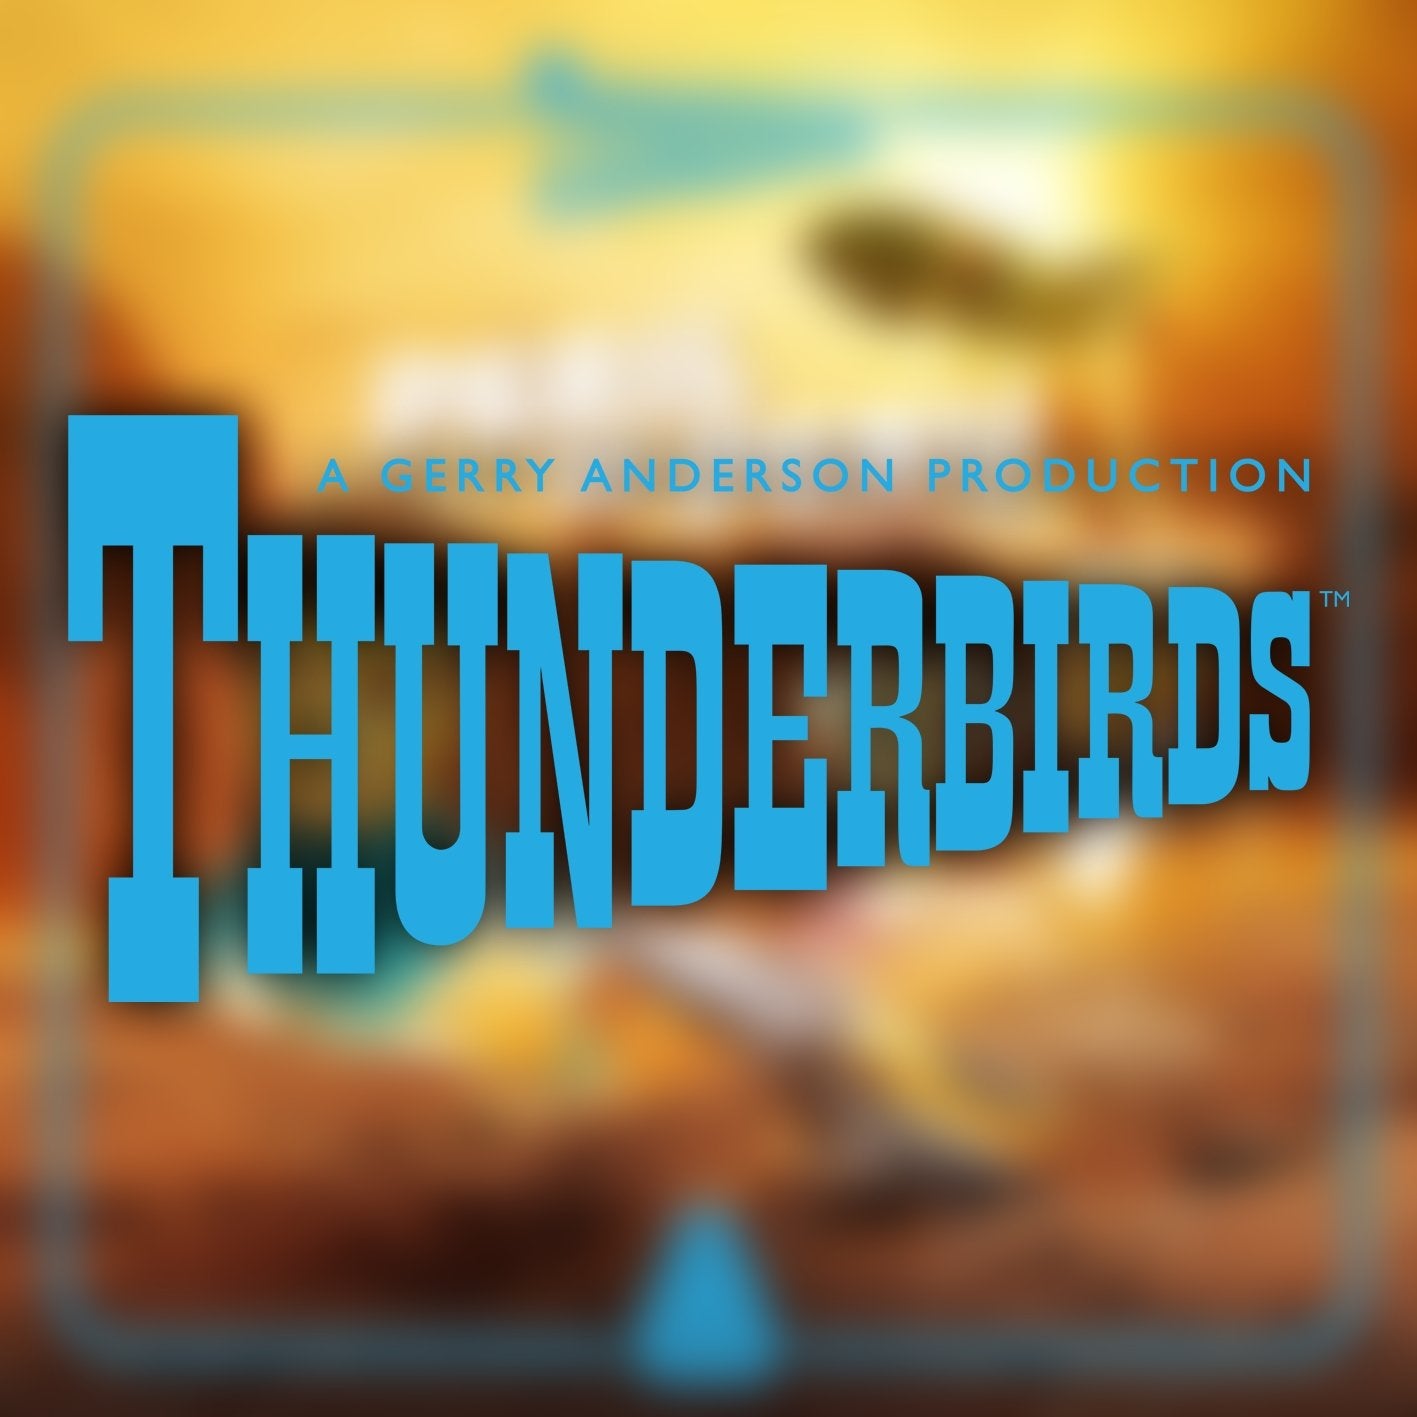 New Thunderbirds Book and Audio Drama - The Gerry Anderson Store